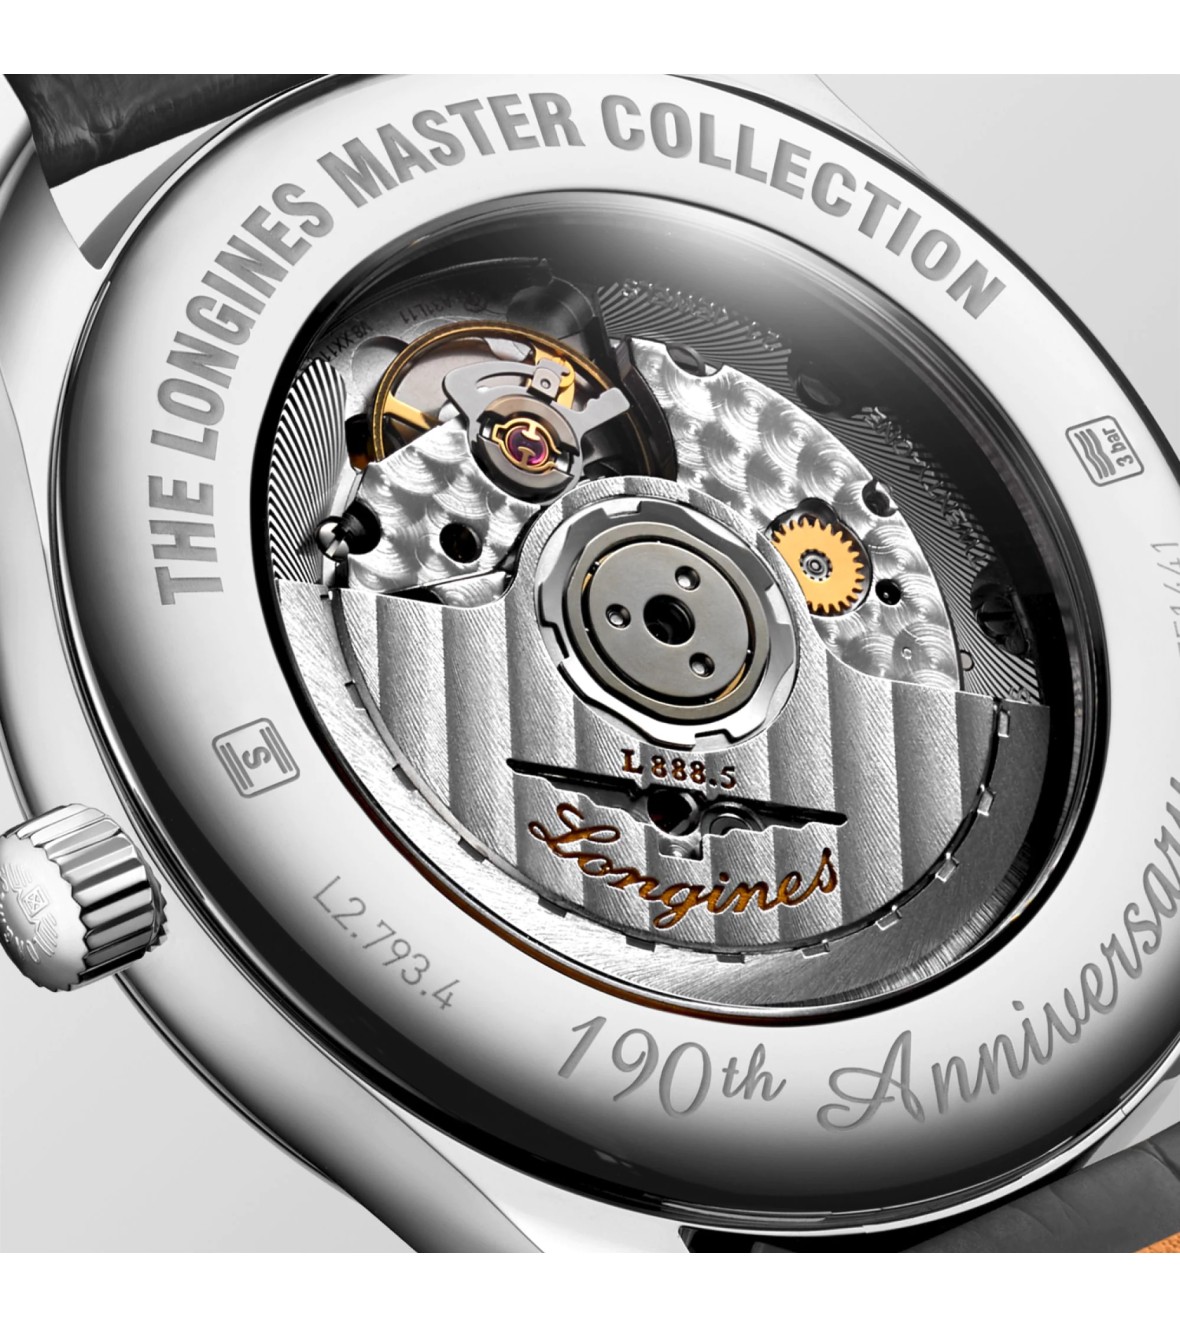 The Longines Master Collection 190th Anniversary L2.793.4.73.2